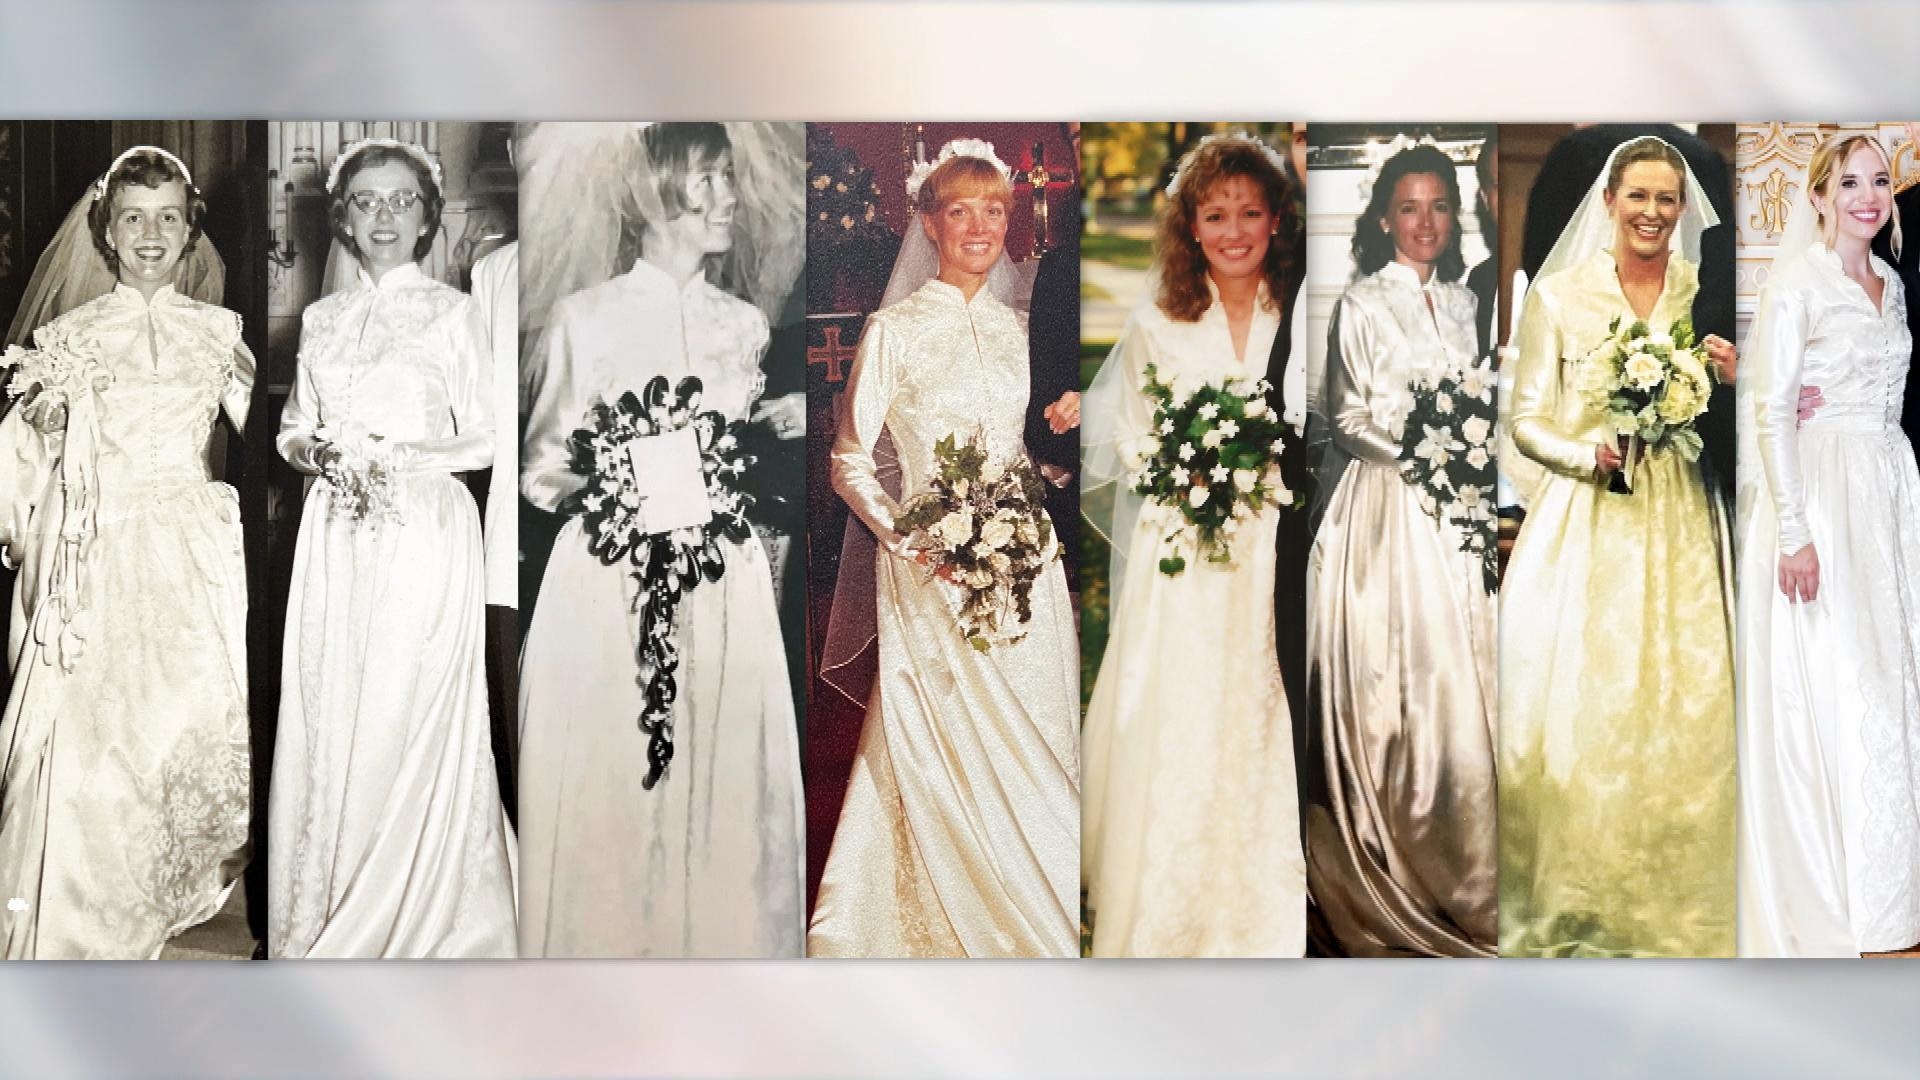 My 127-year-old wedding dress: Bride tells story of her family